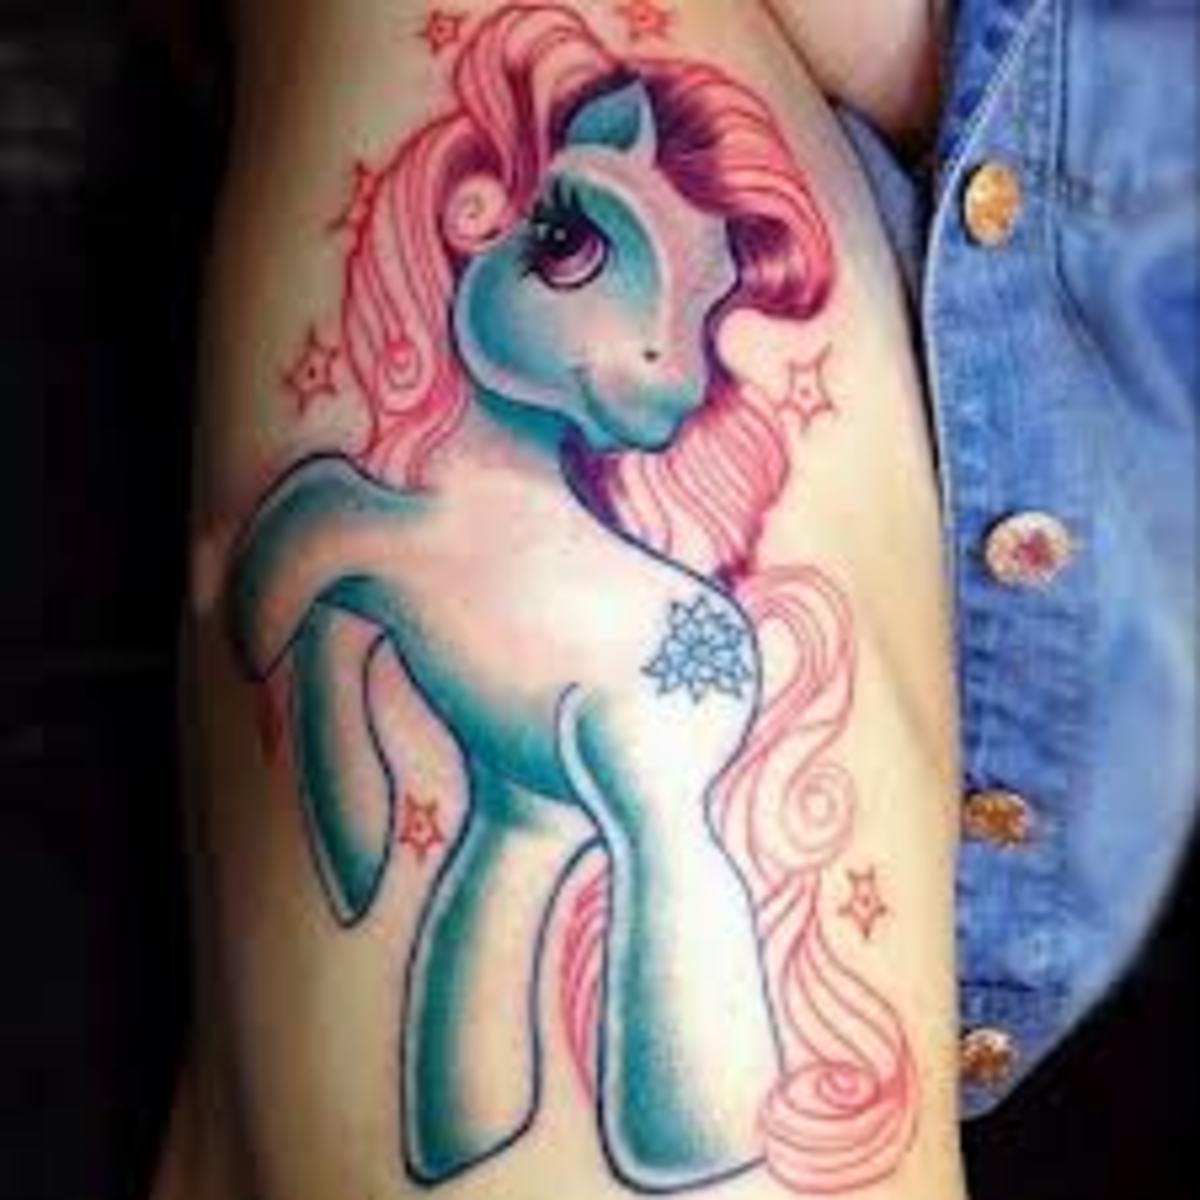 My Little Pony Tattoo Designs And Meanings-My Little Pony Tattoo Ideas And Pictures